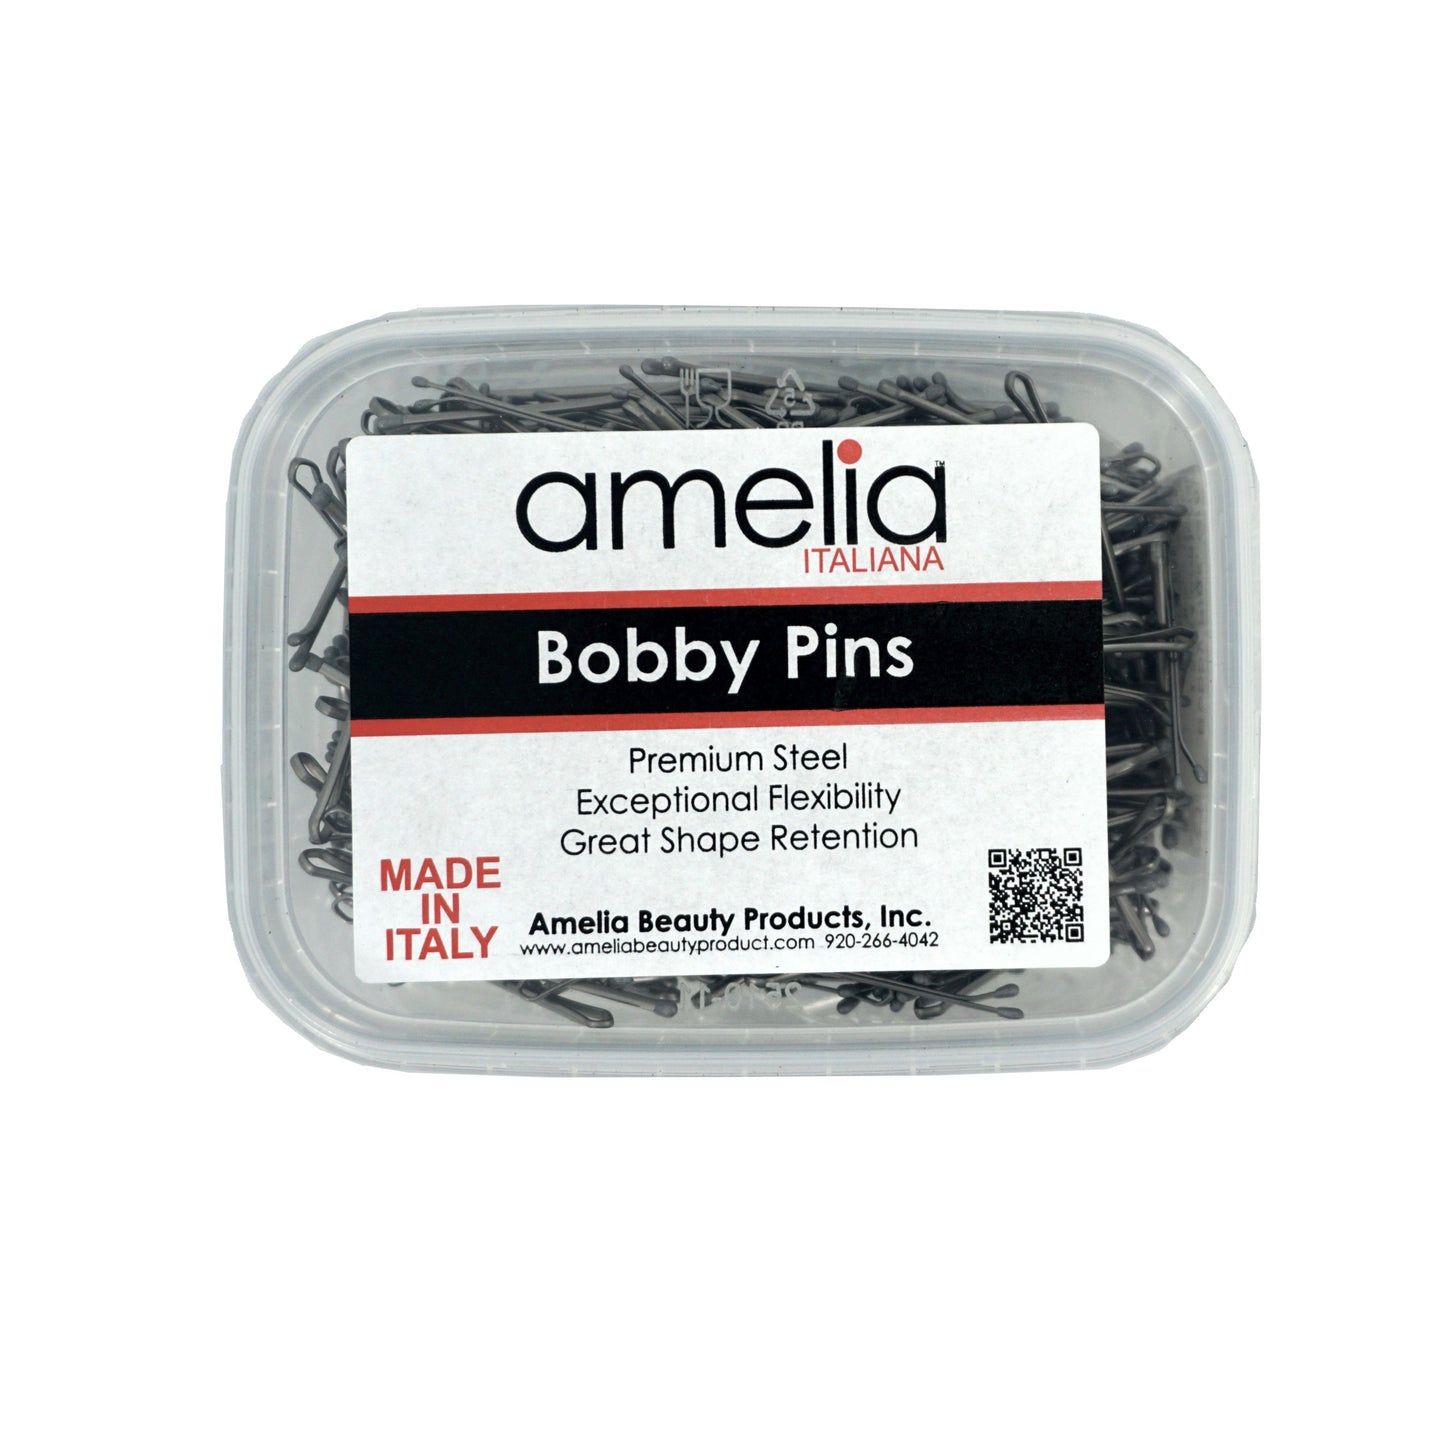 500, Grey, 1.6in (4.0cm), Flat Italian Made Bobby Pins, Recloseable Stay Clean and Organized Container